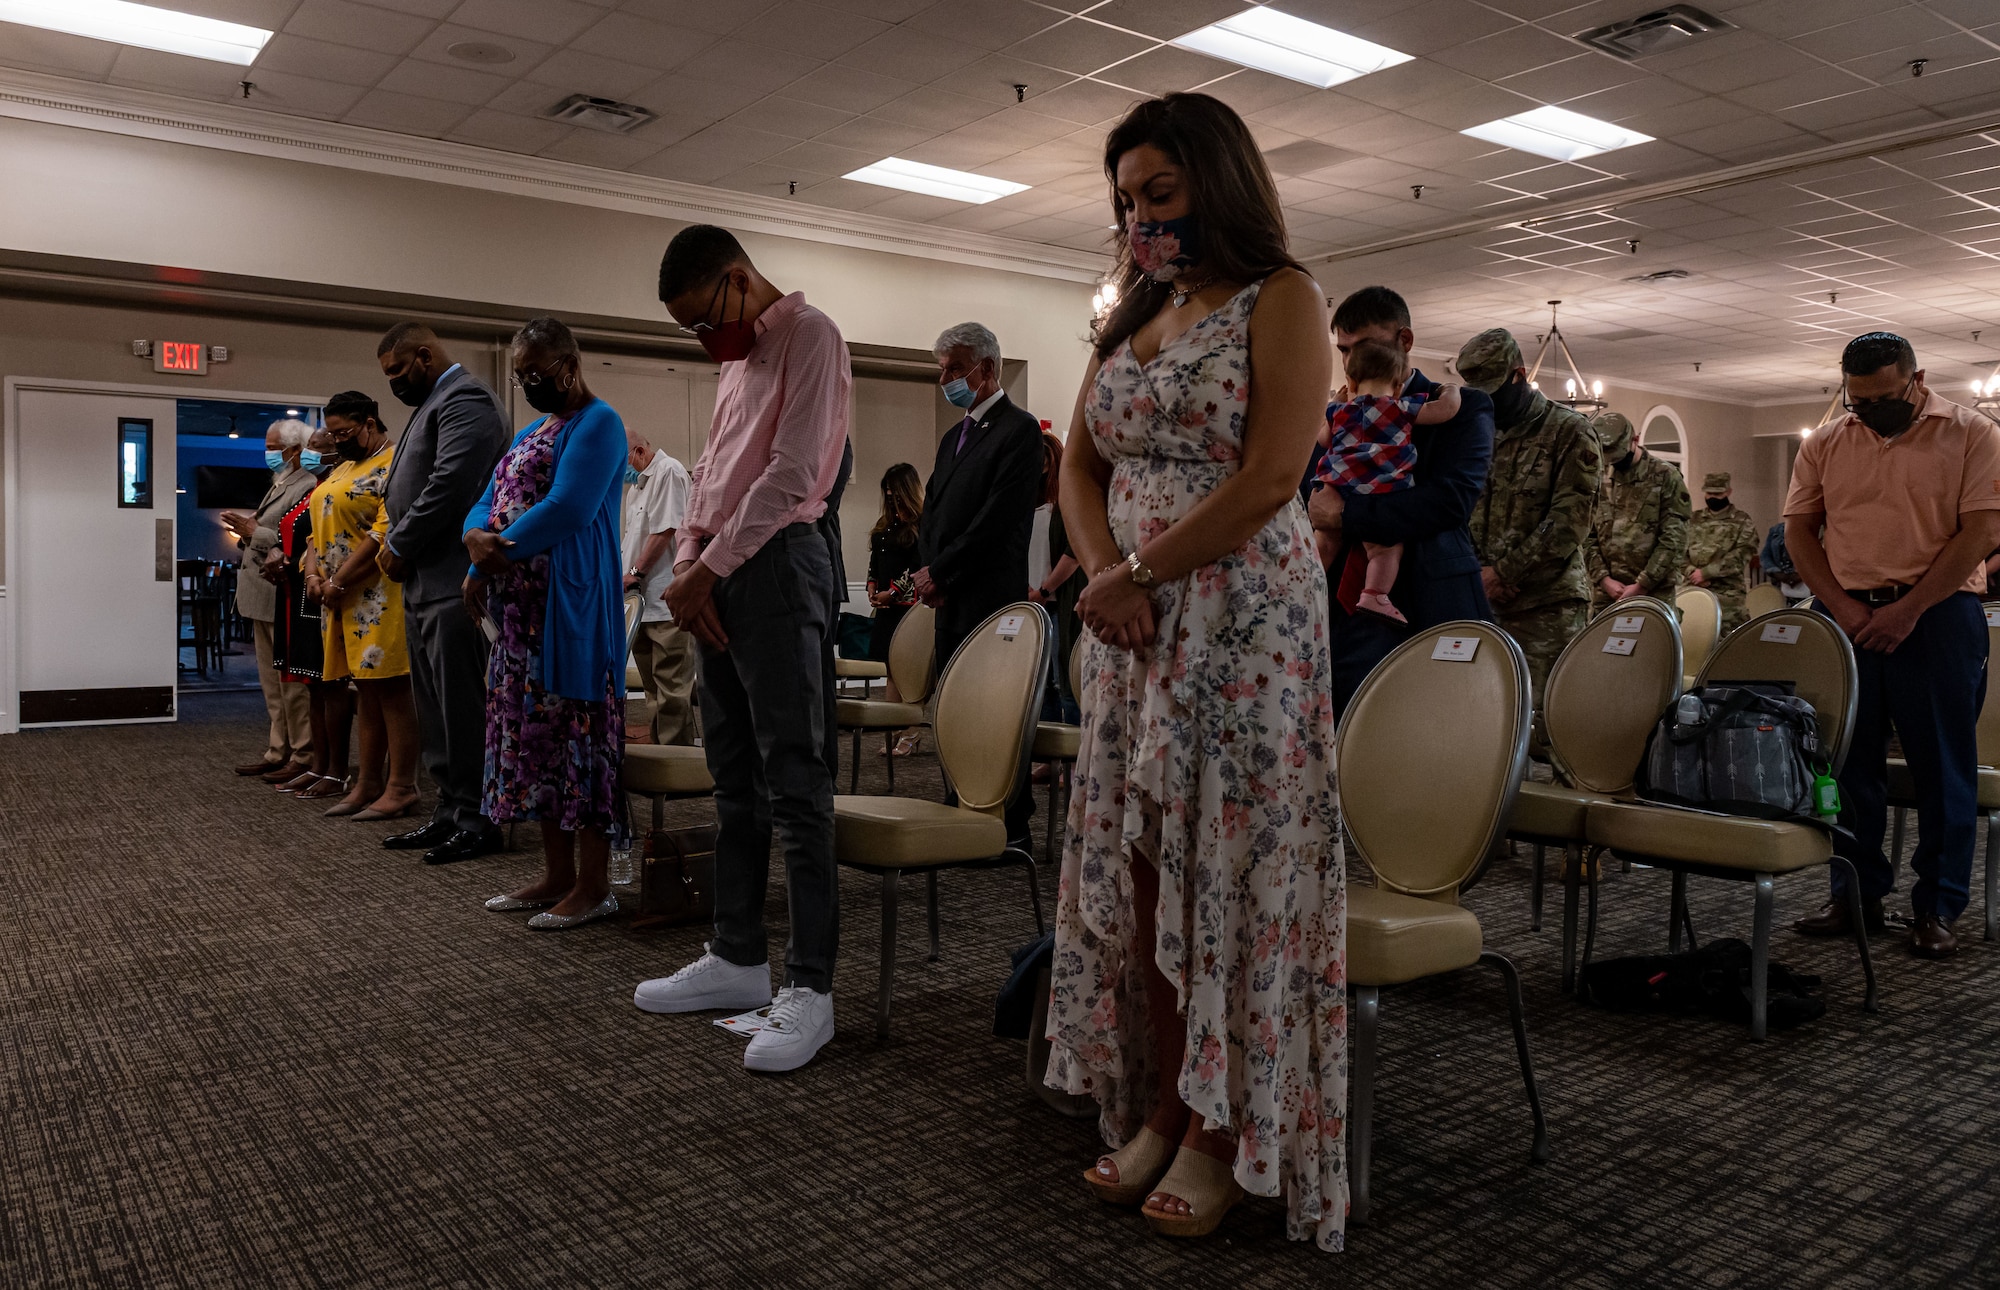 A photo of families bowing their head.